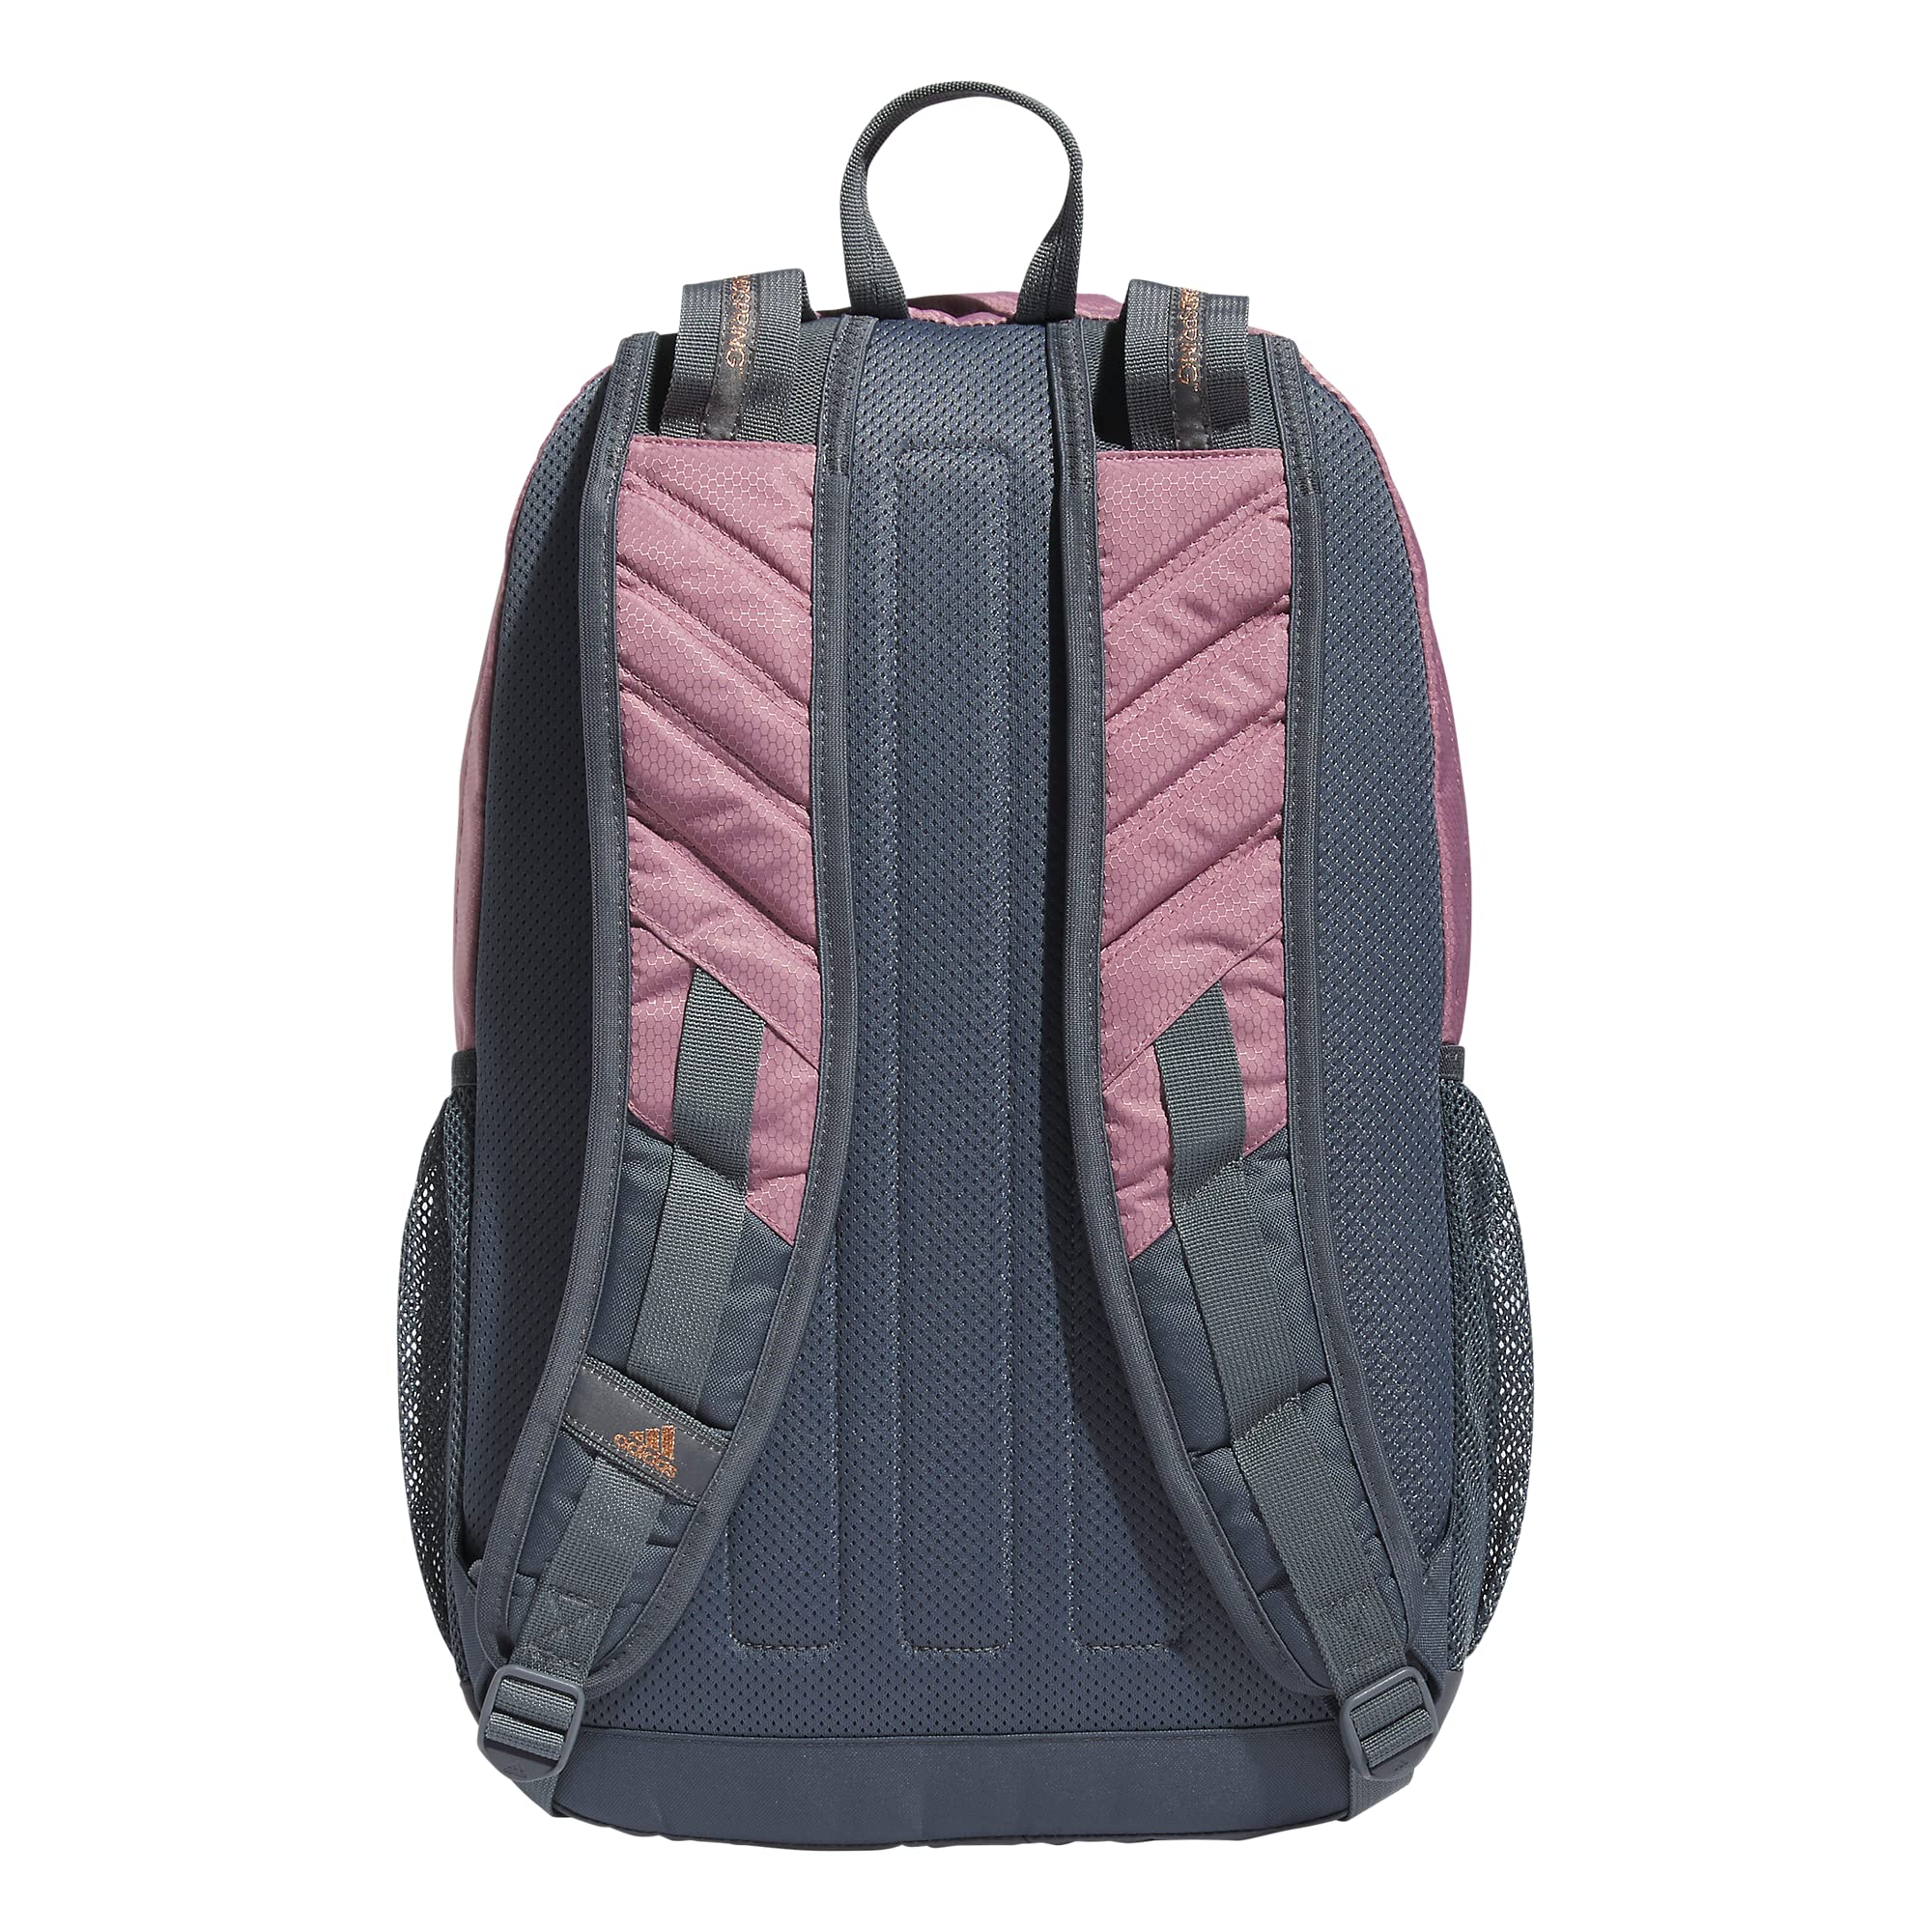 adidas Prime 6 Backpack, Wonder Orchid Purple/Rose Gold, One Size